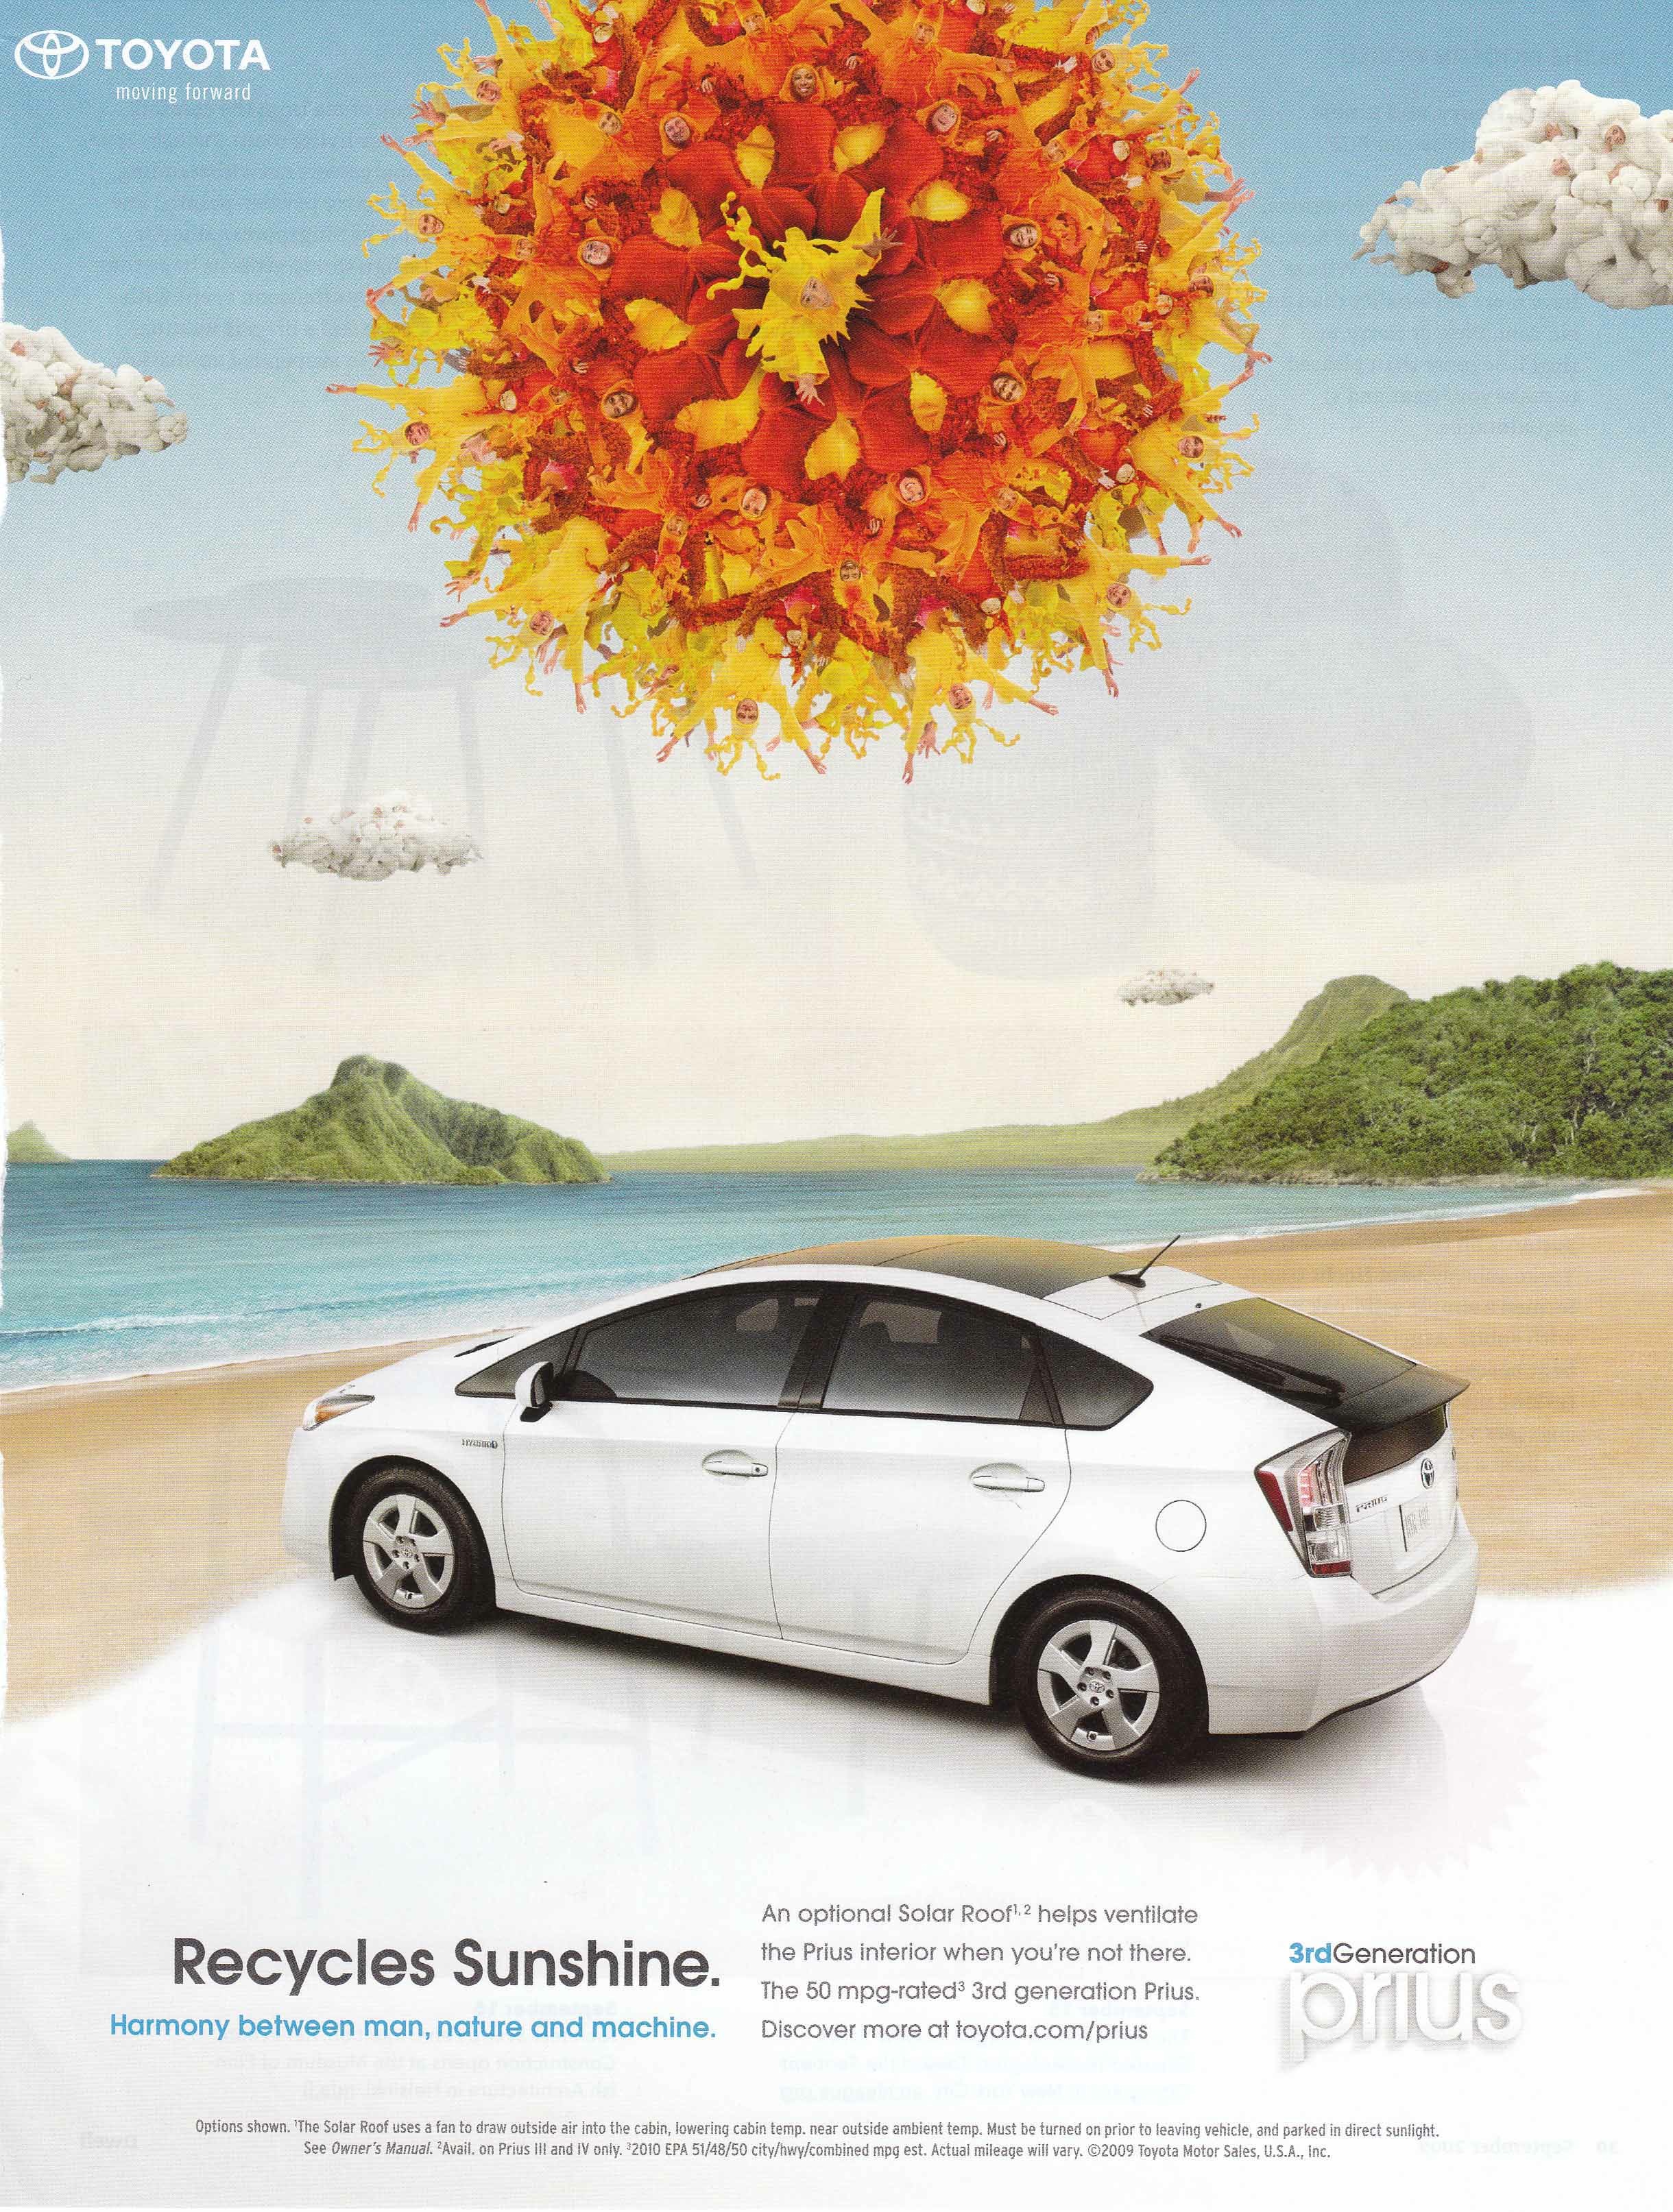 toyota and advertising campaign #3